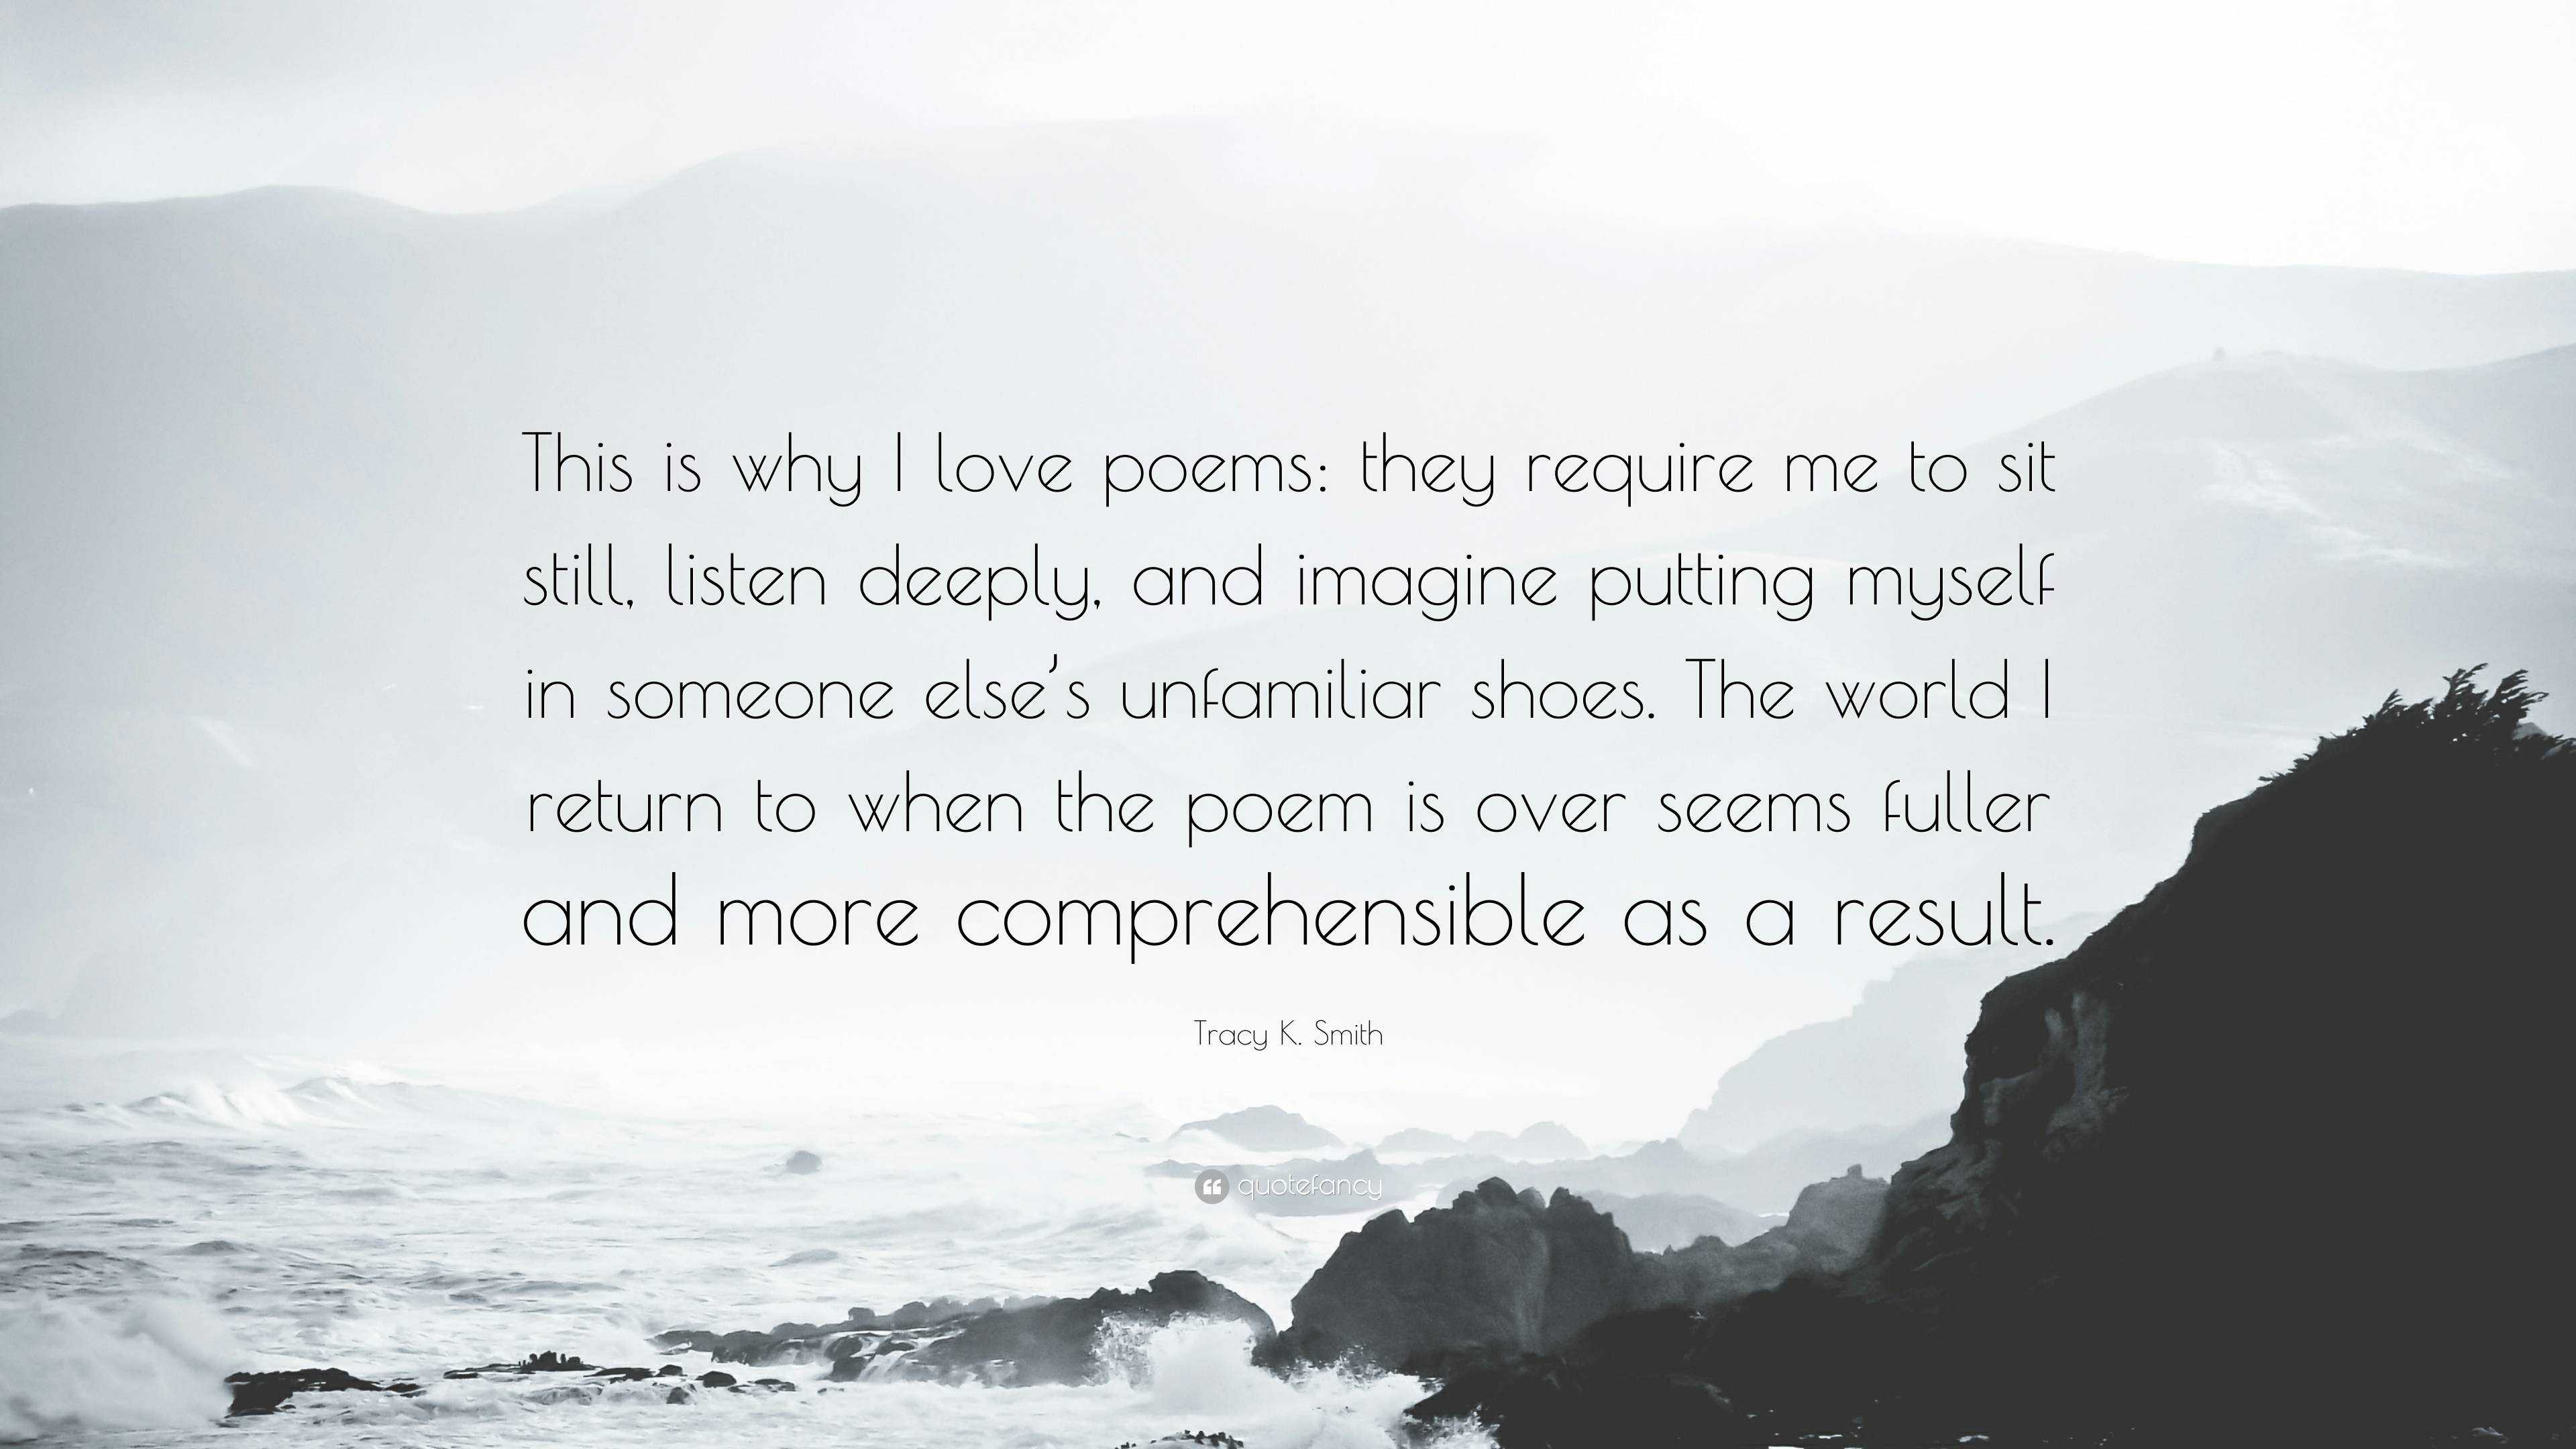 https://quotefancy.com/media/wallpaper/3840x2160/6661240-Tracy-K-Smith-Quote-This-is-why-I-love-poems-they-require-me-to.jpg